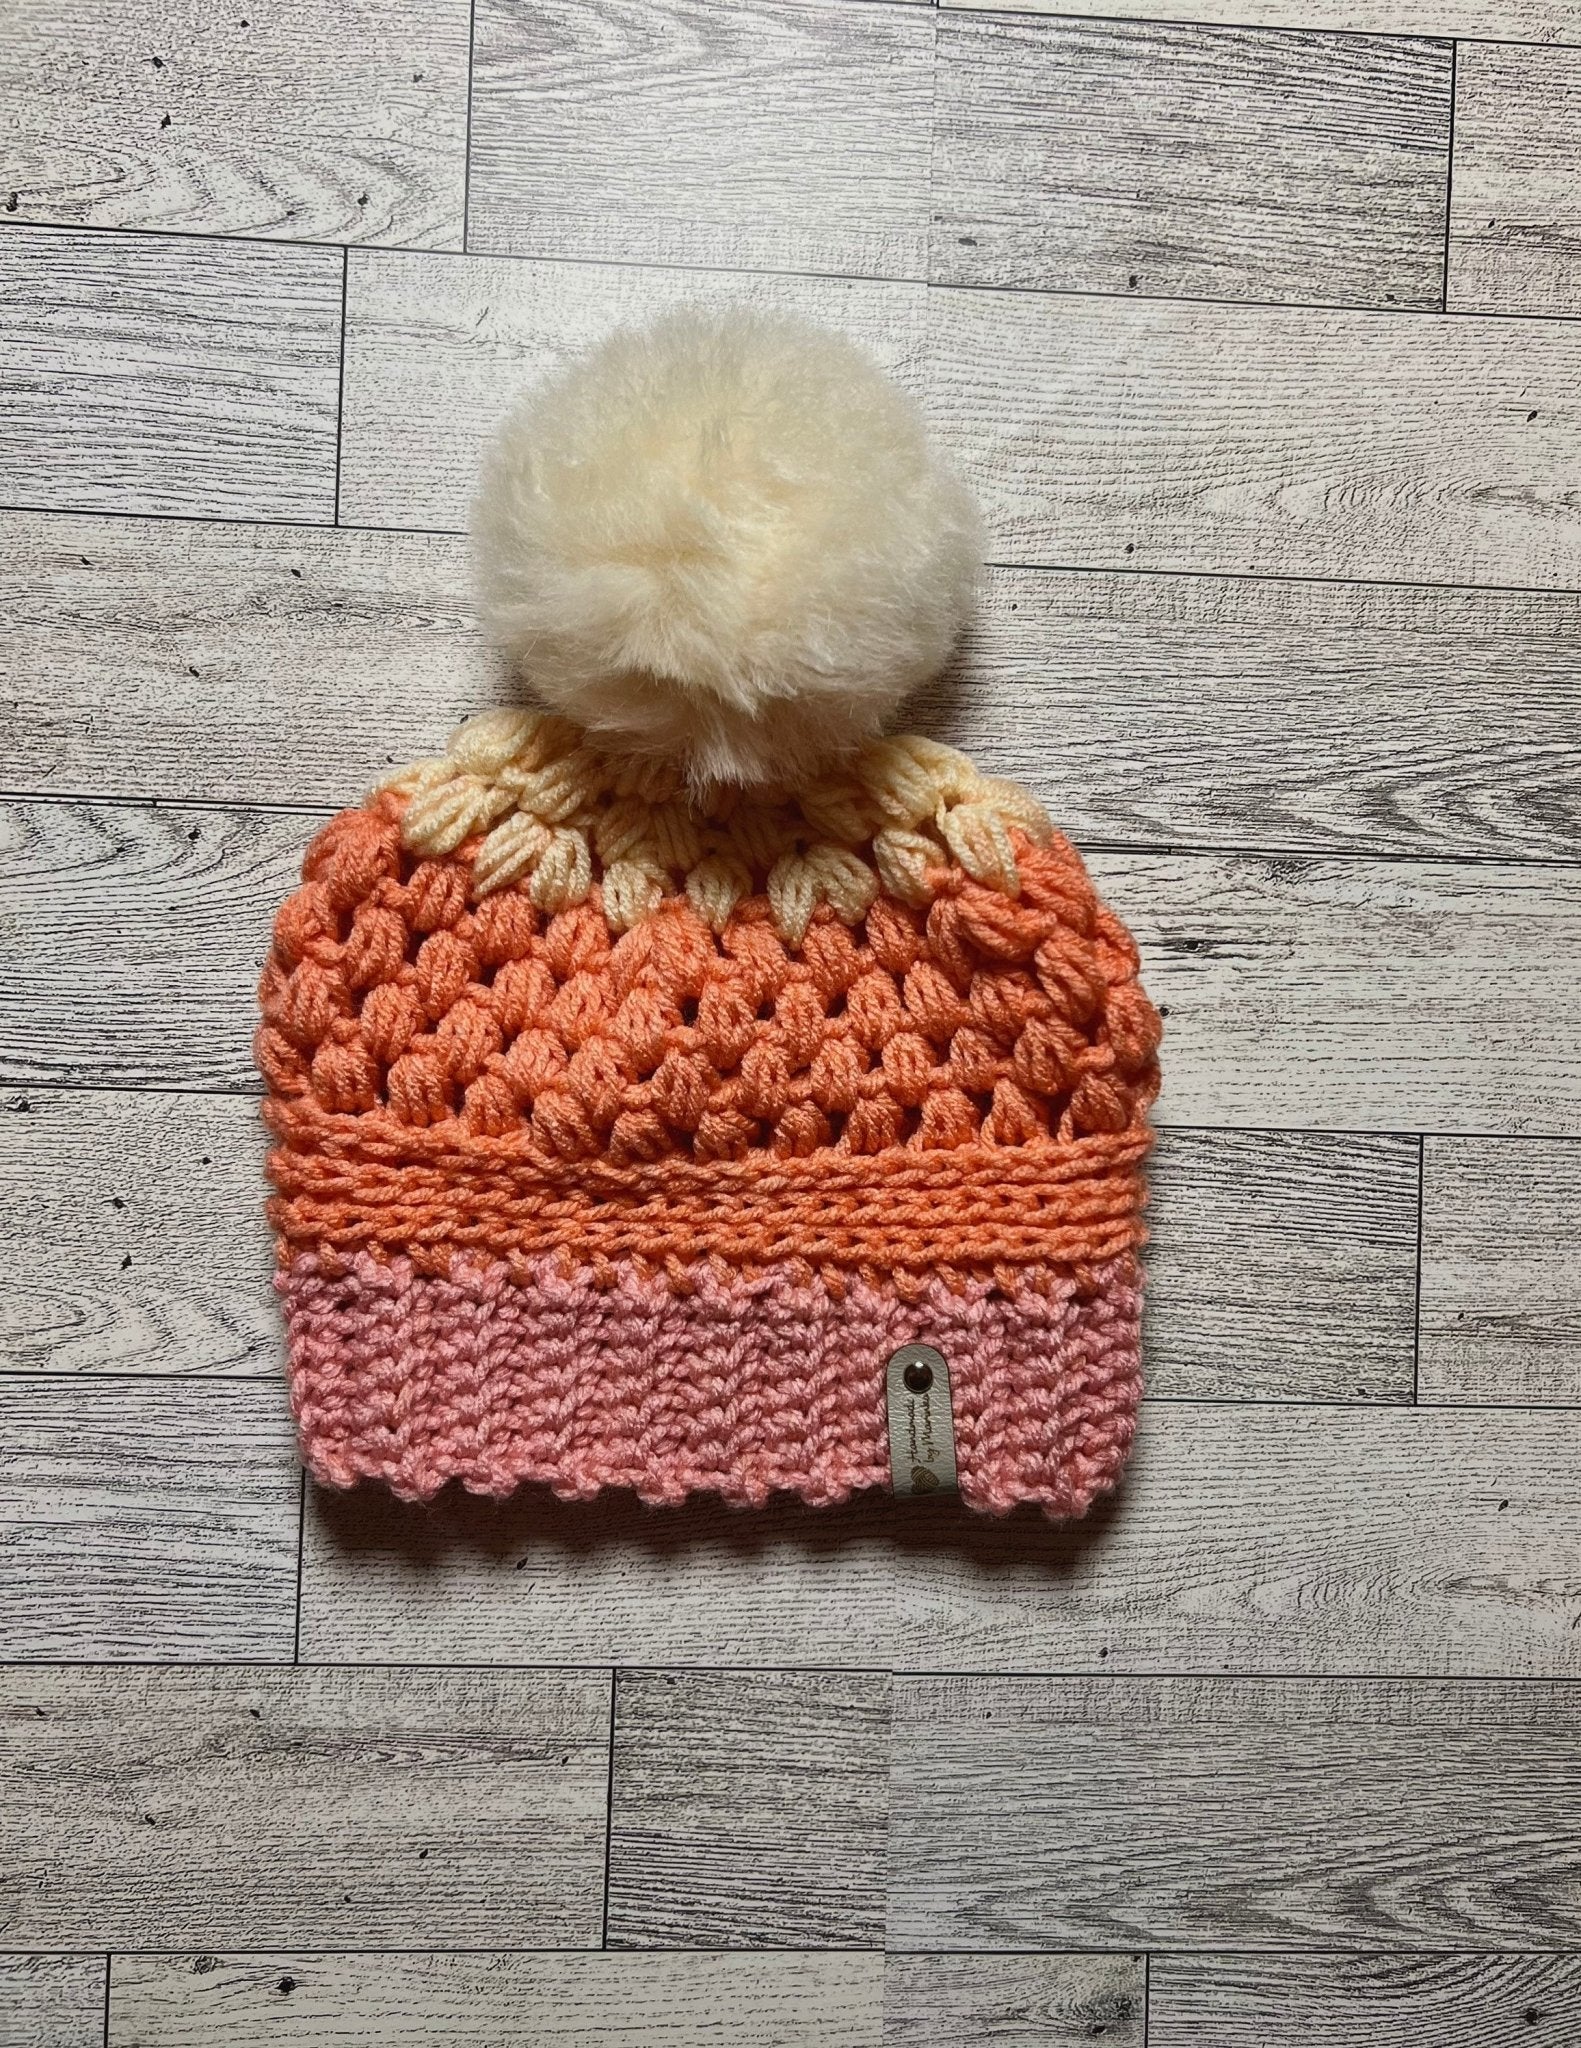 Coral pink baby girl hat,handmade crochet hat gradient coral pink color with beige faux fur pompom, fall or winter beanie hat, toddler hat - Lilly Grace Sparkle Boutique